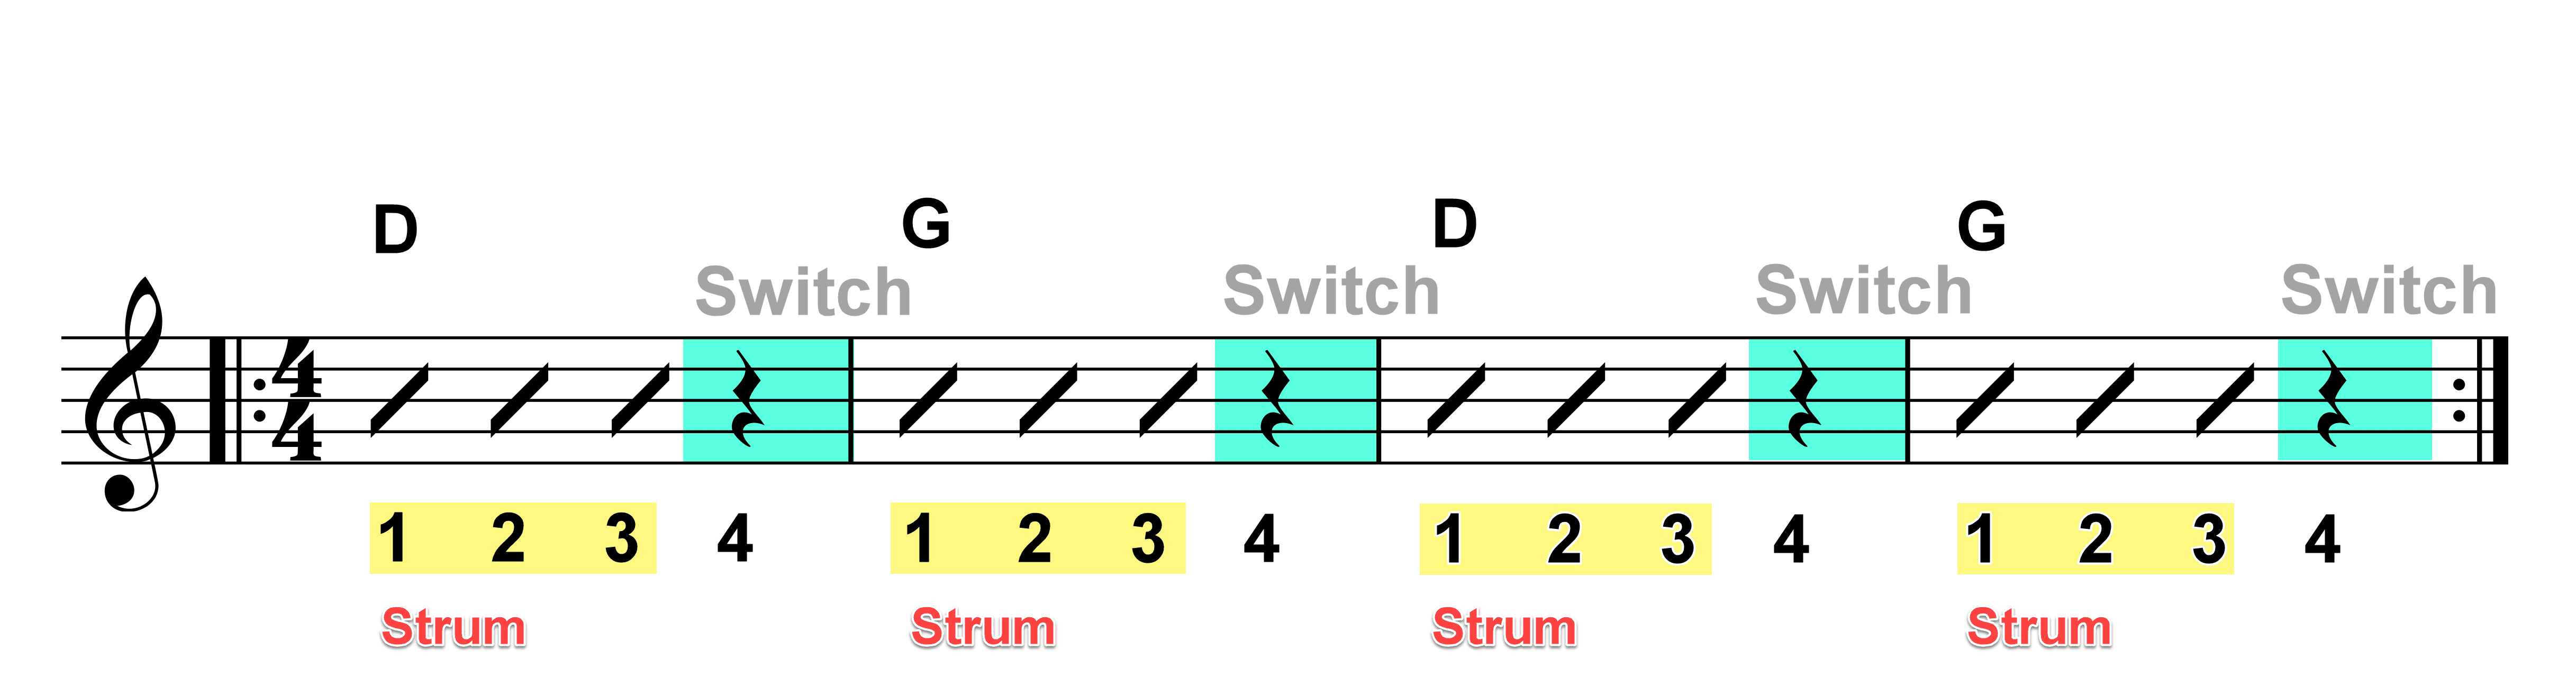 Chord switching game graphics-3 D to G